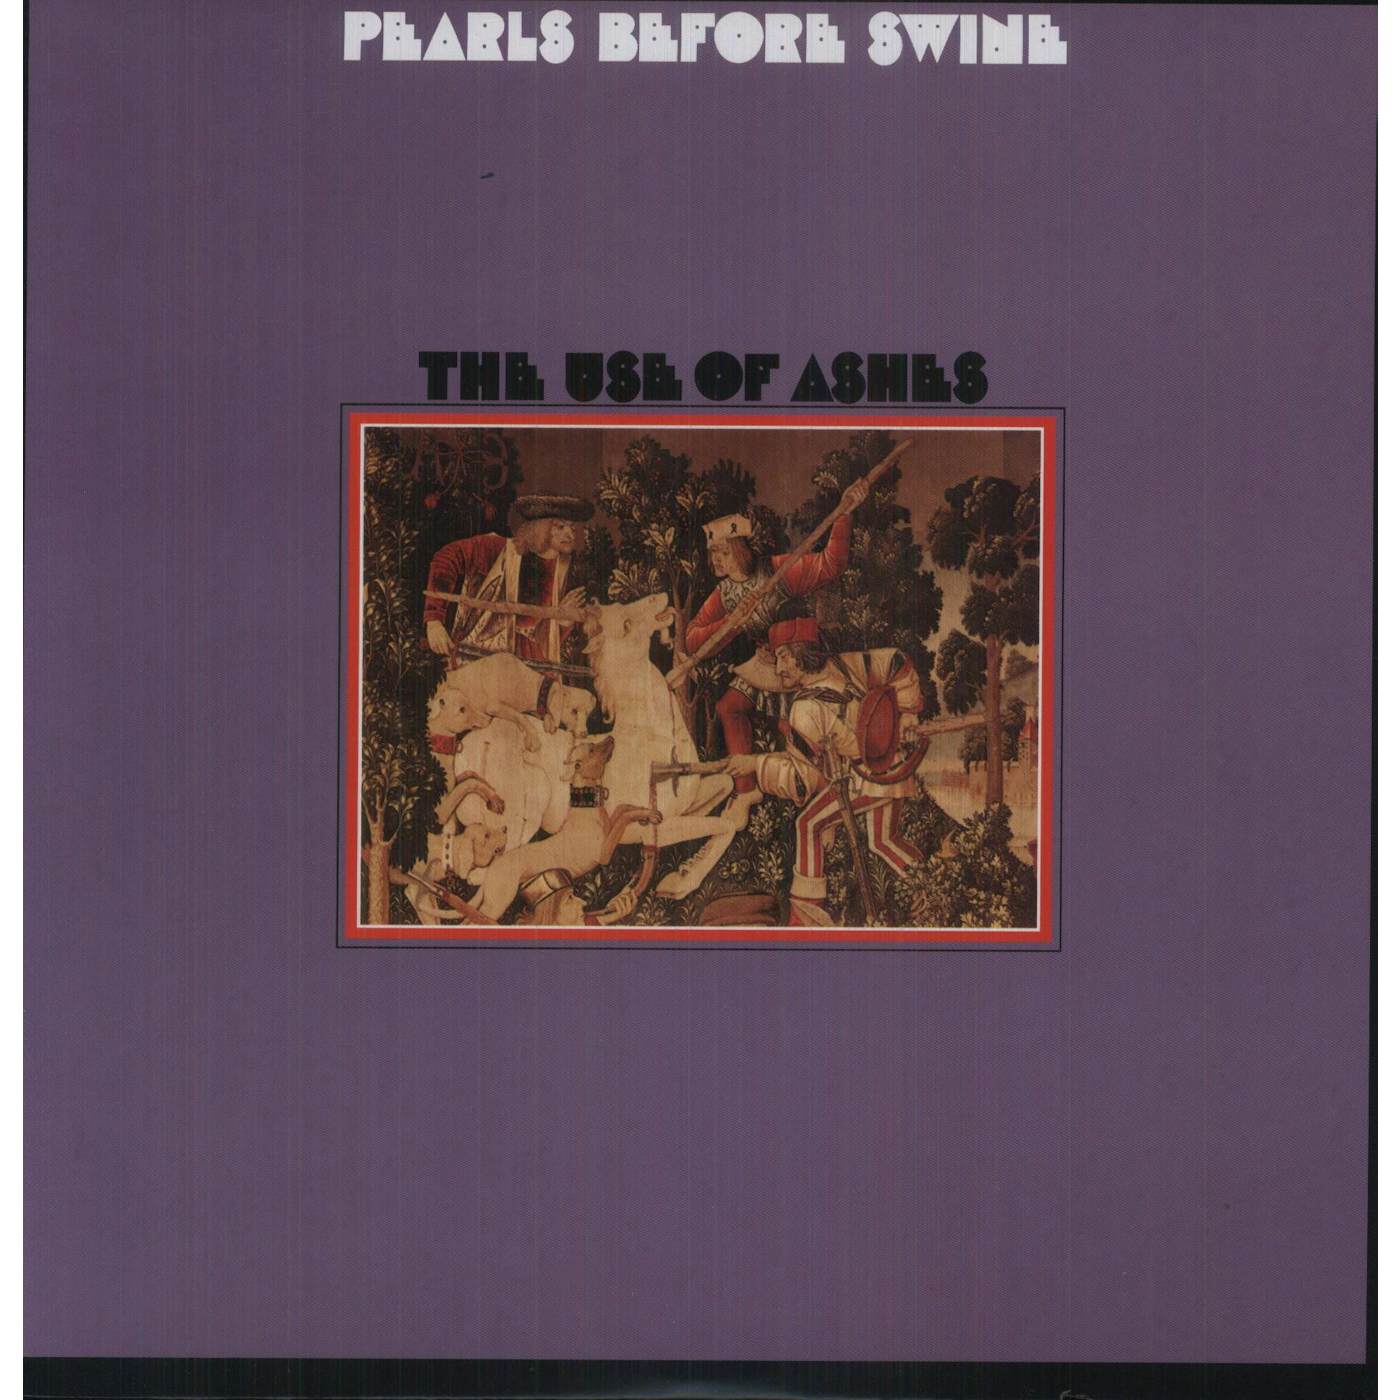 Pearls Before Swine USE OF ASHES Vinyl Record